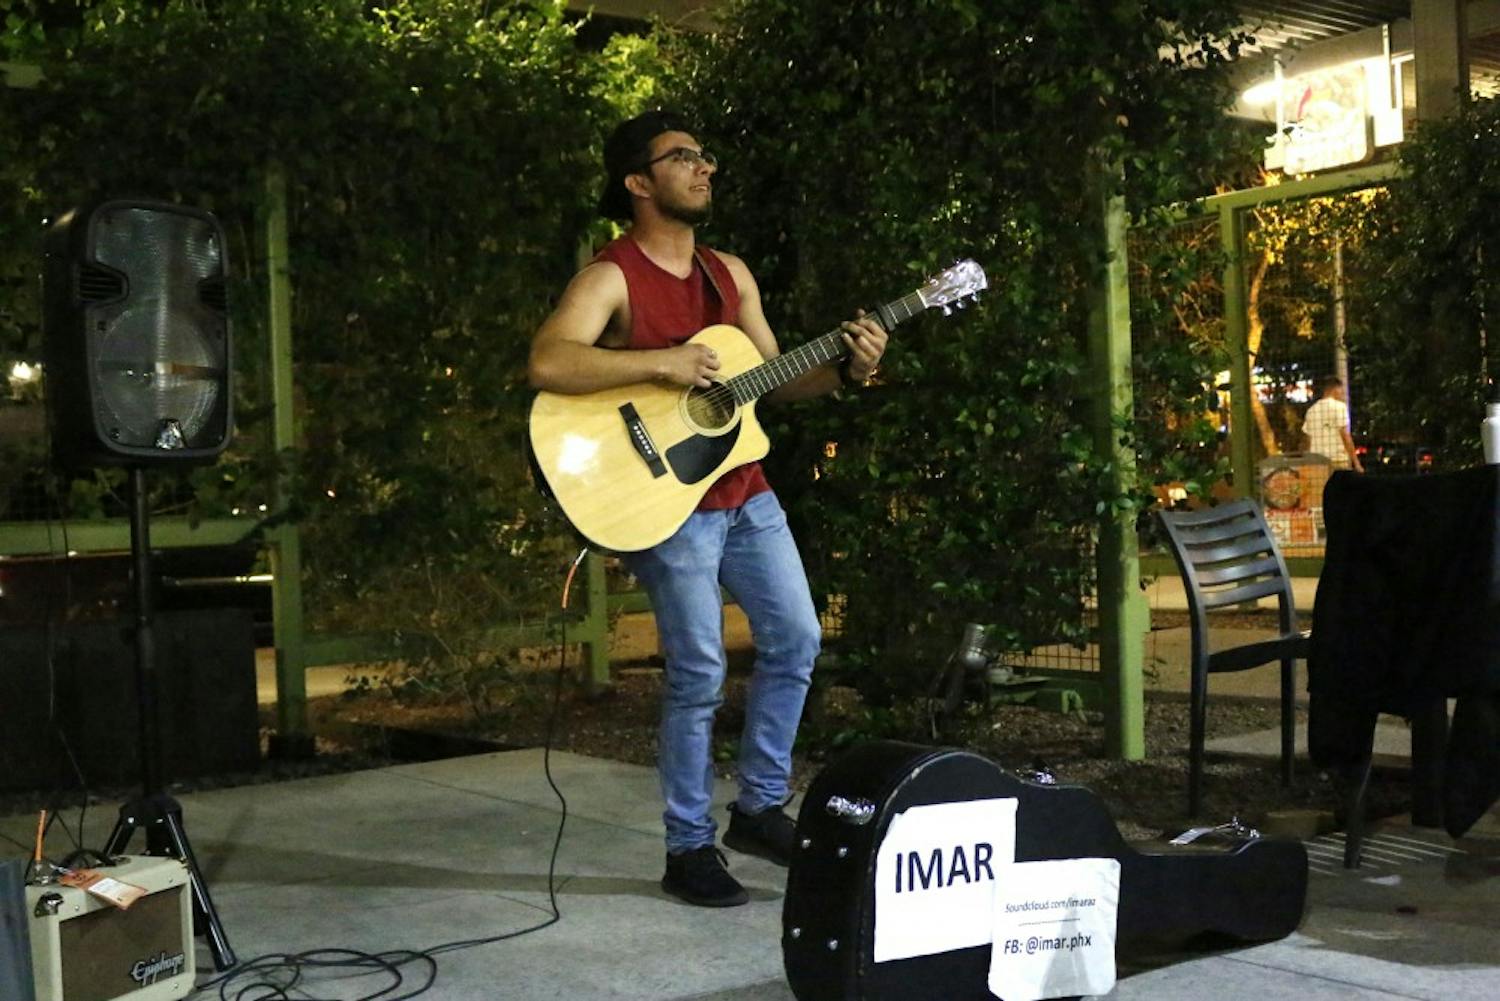 ASU communications junior Andres “Imar” Rosales performs covers of Pumped Up Kicks and Sweater Weather at The Heart of an Artist open mic night at the downtown campus on Tuesday, March 21, 2017.